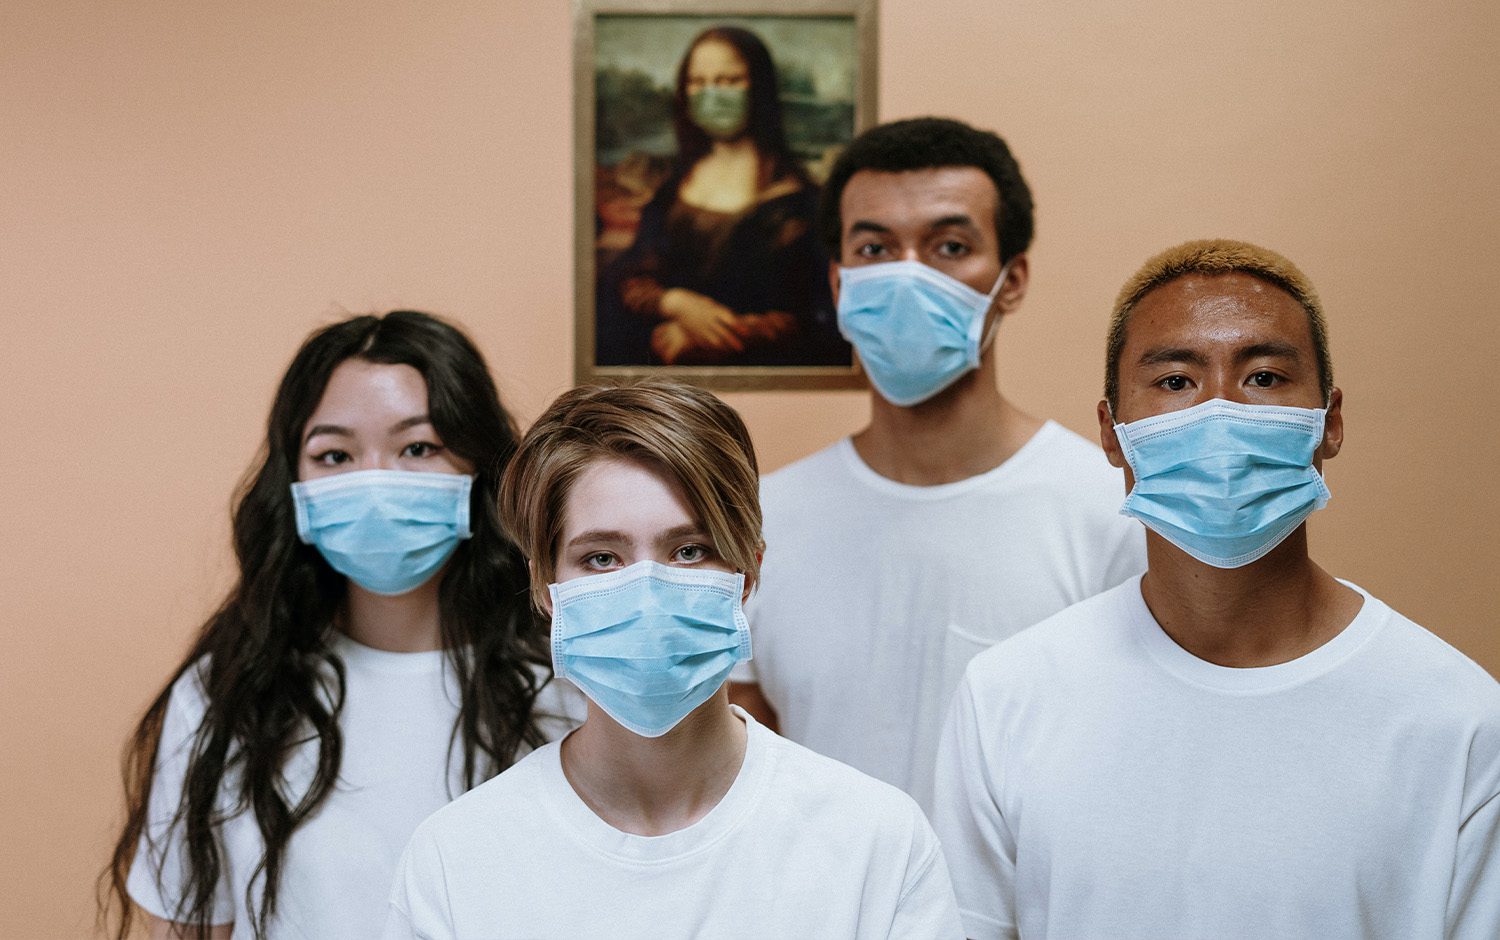 A group of people wearing surgical masks in front of a painting.